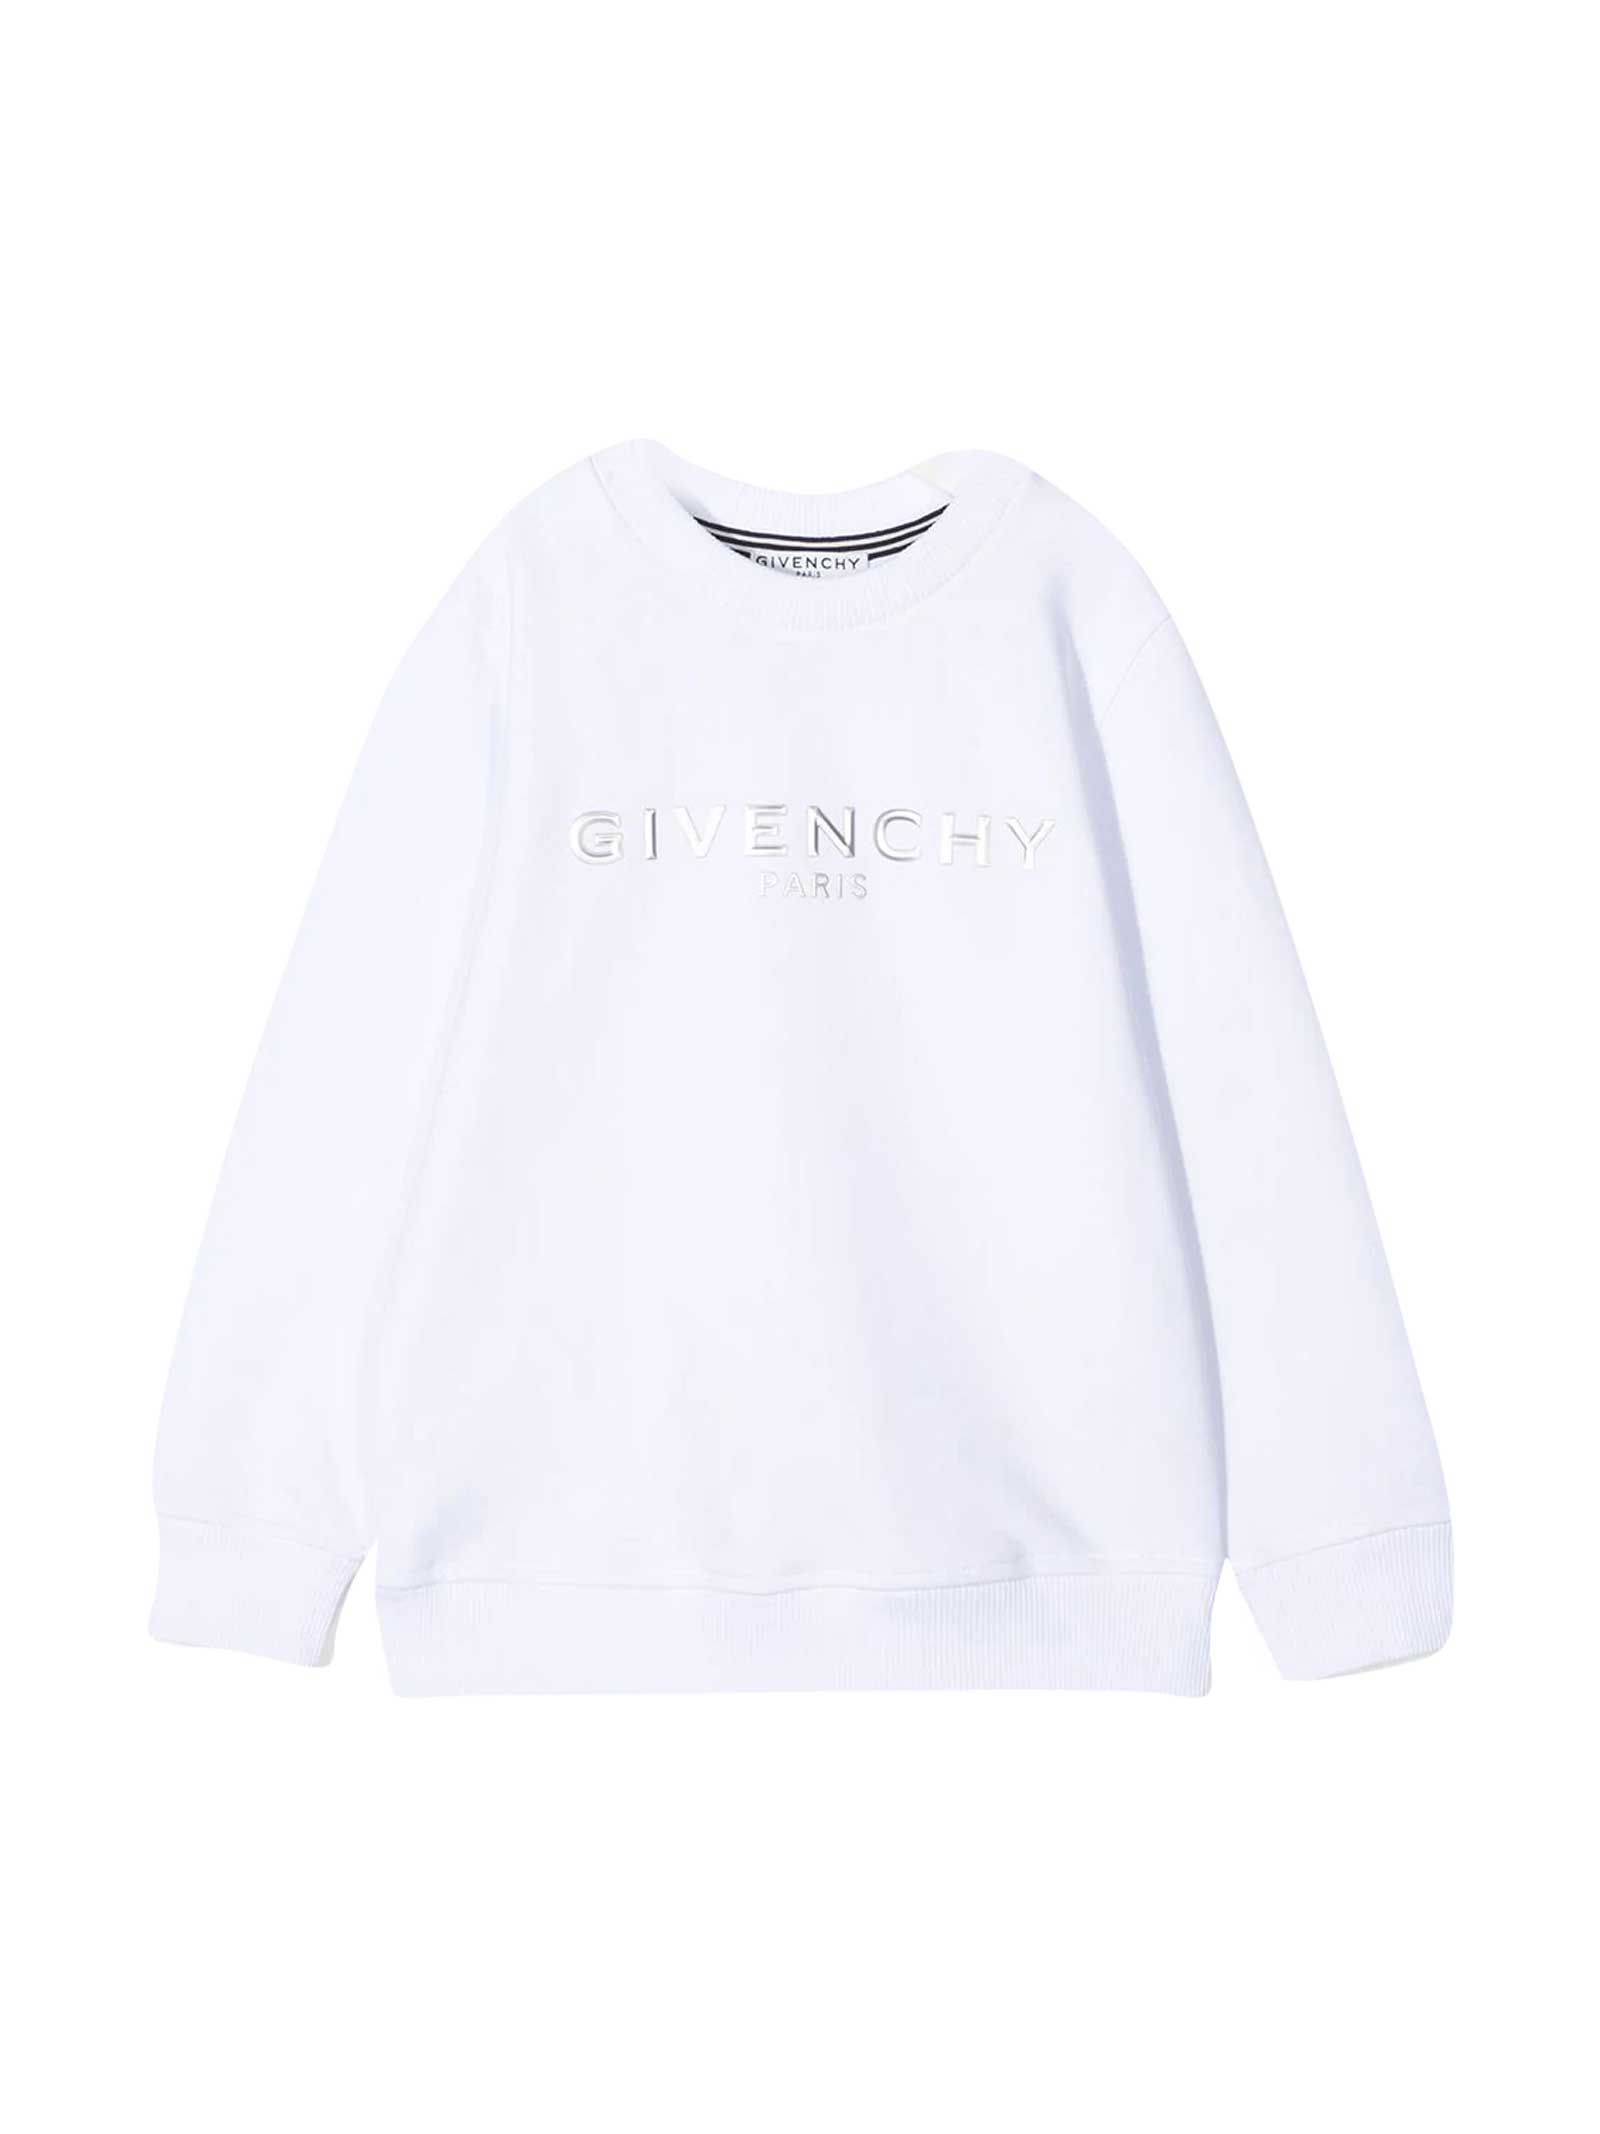 GIVENCHY WHITE TEEN SWEATSHIRT WITH LOGO,H25241 10BT